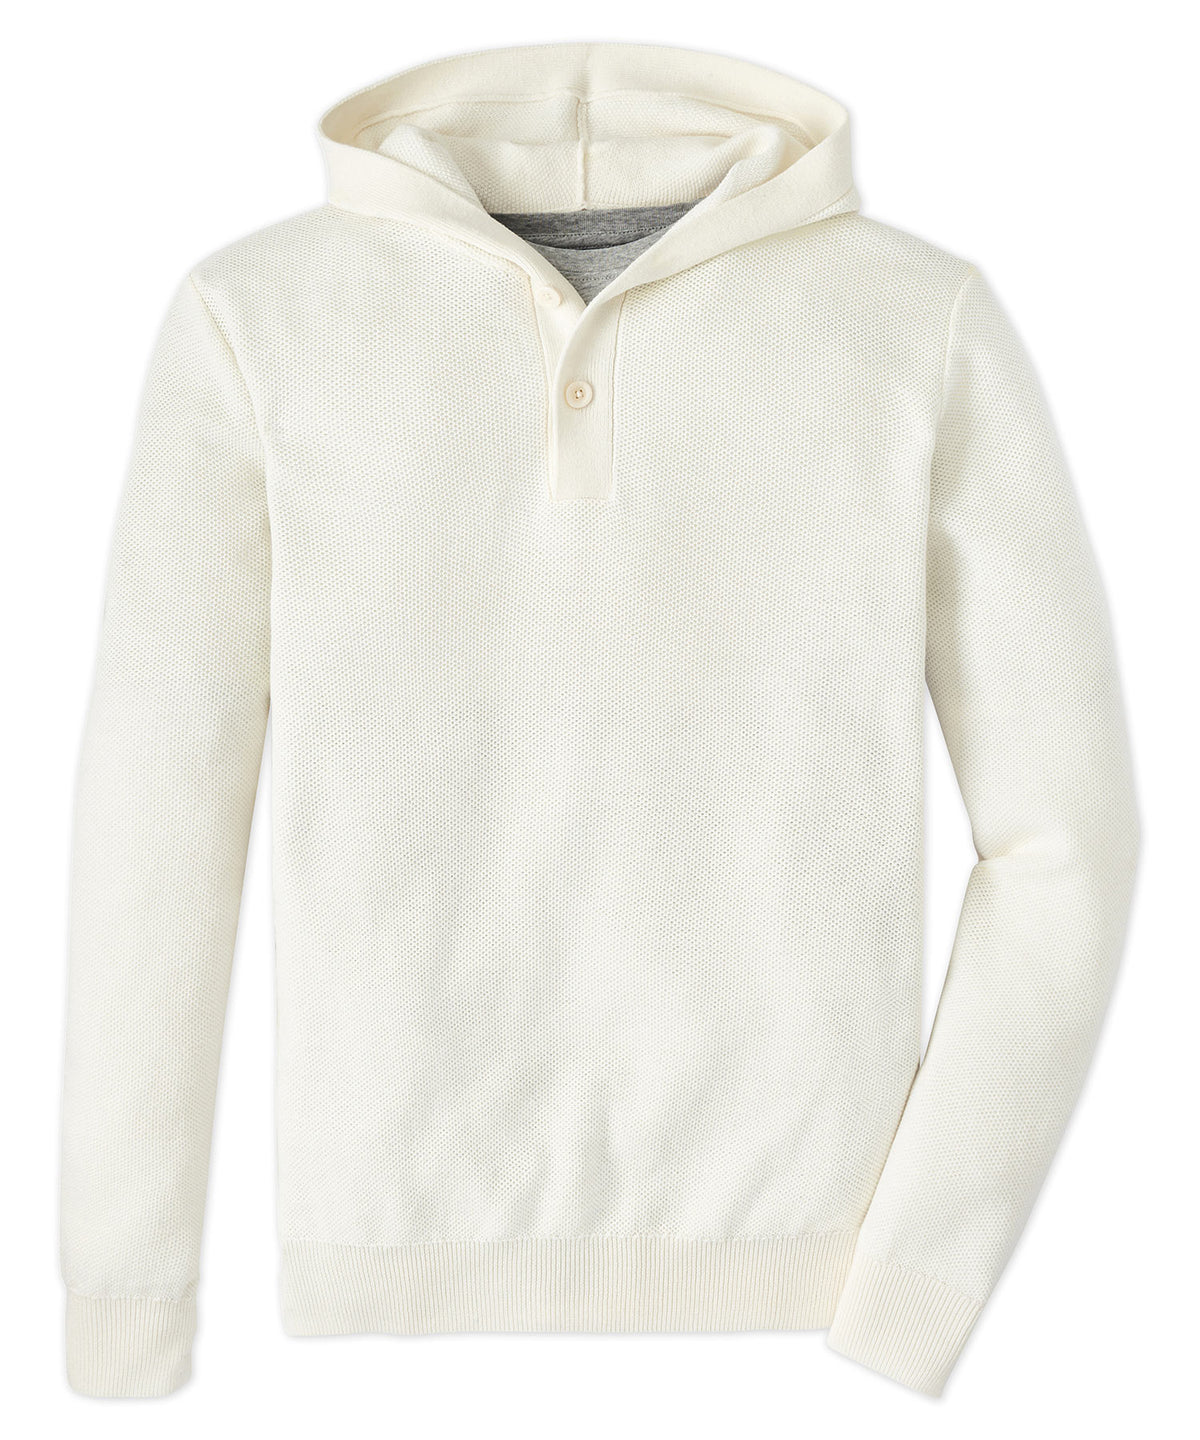 Peter Millar Long Sleeve Hickory Henley Hoodie Pullover, Big & Tall